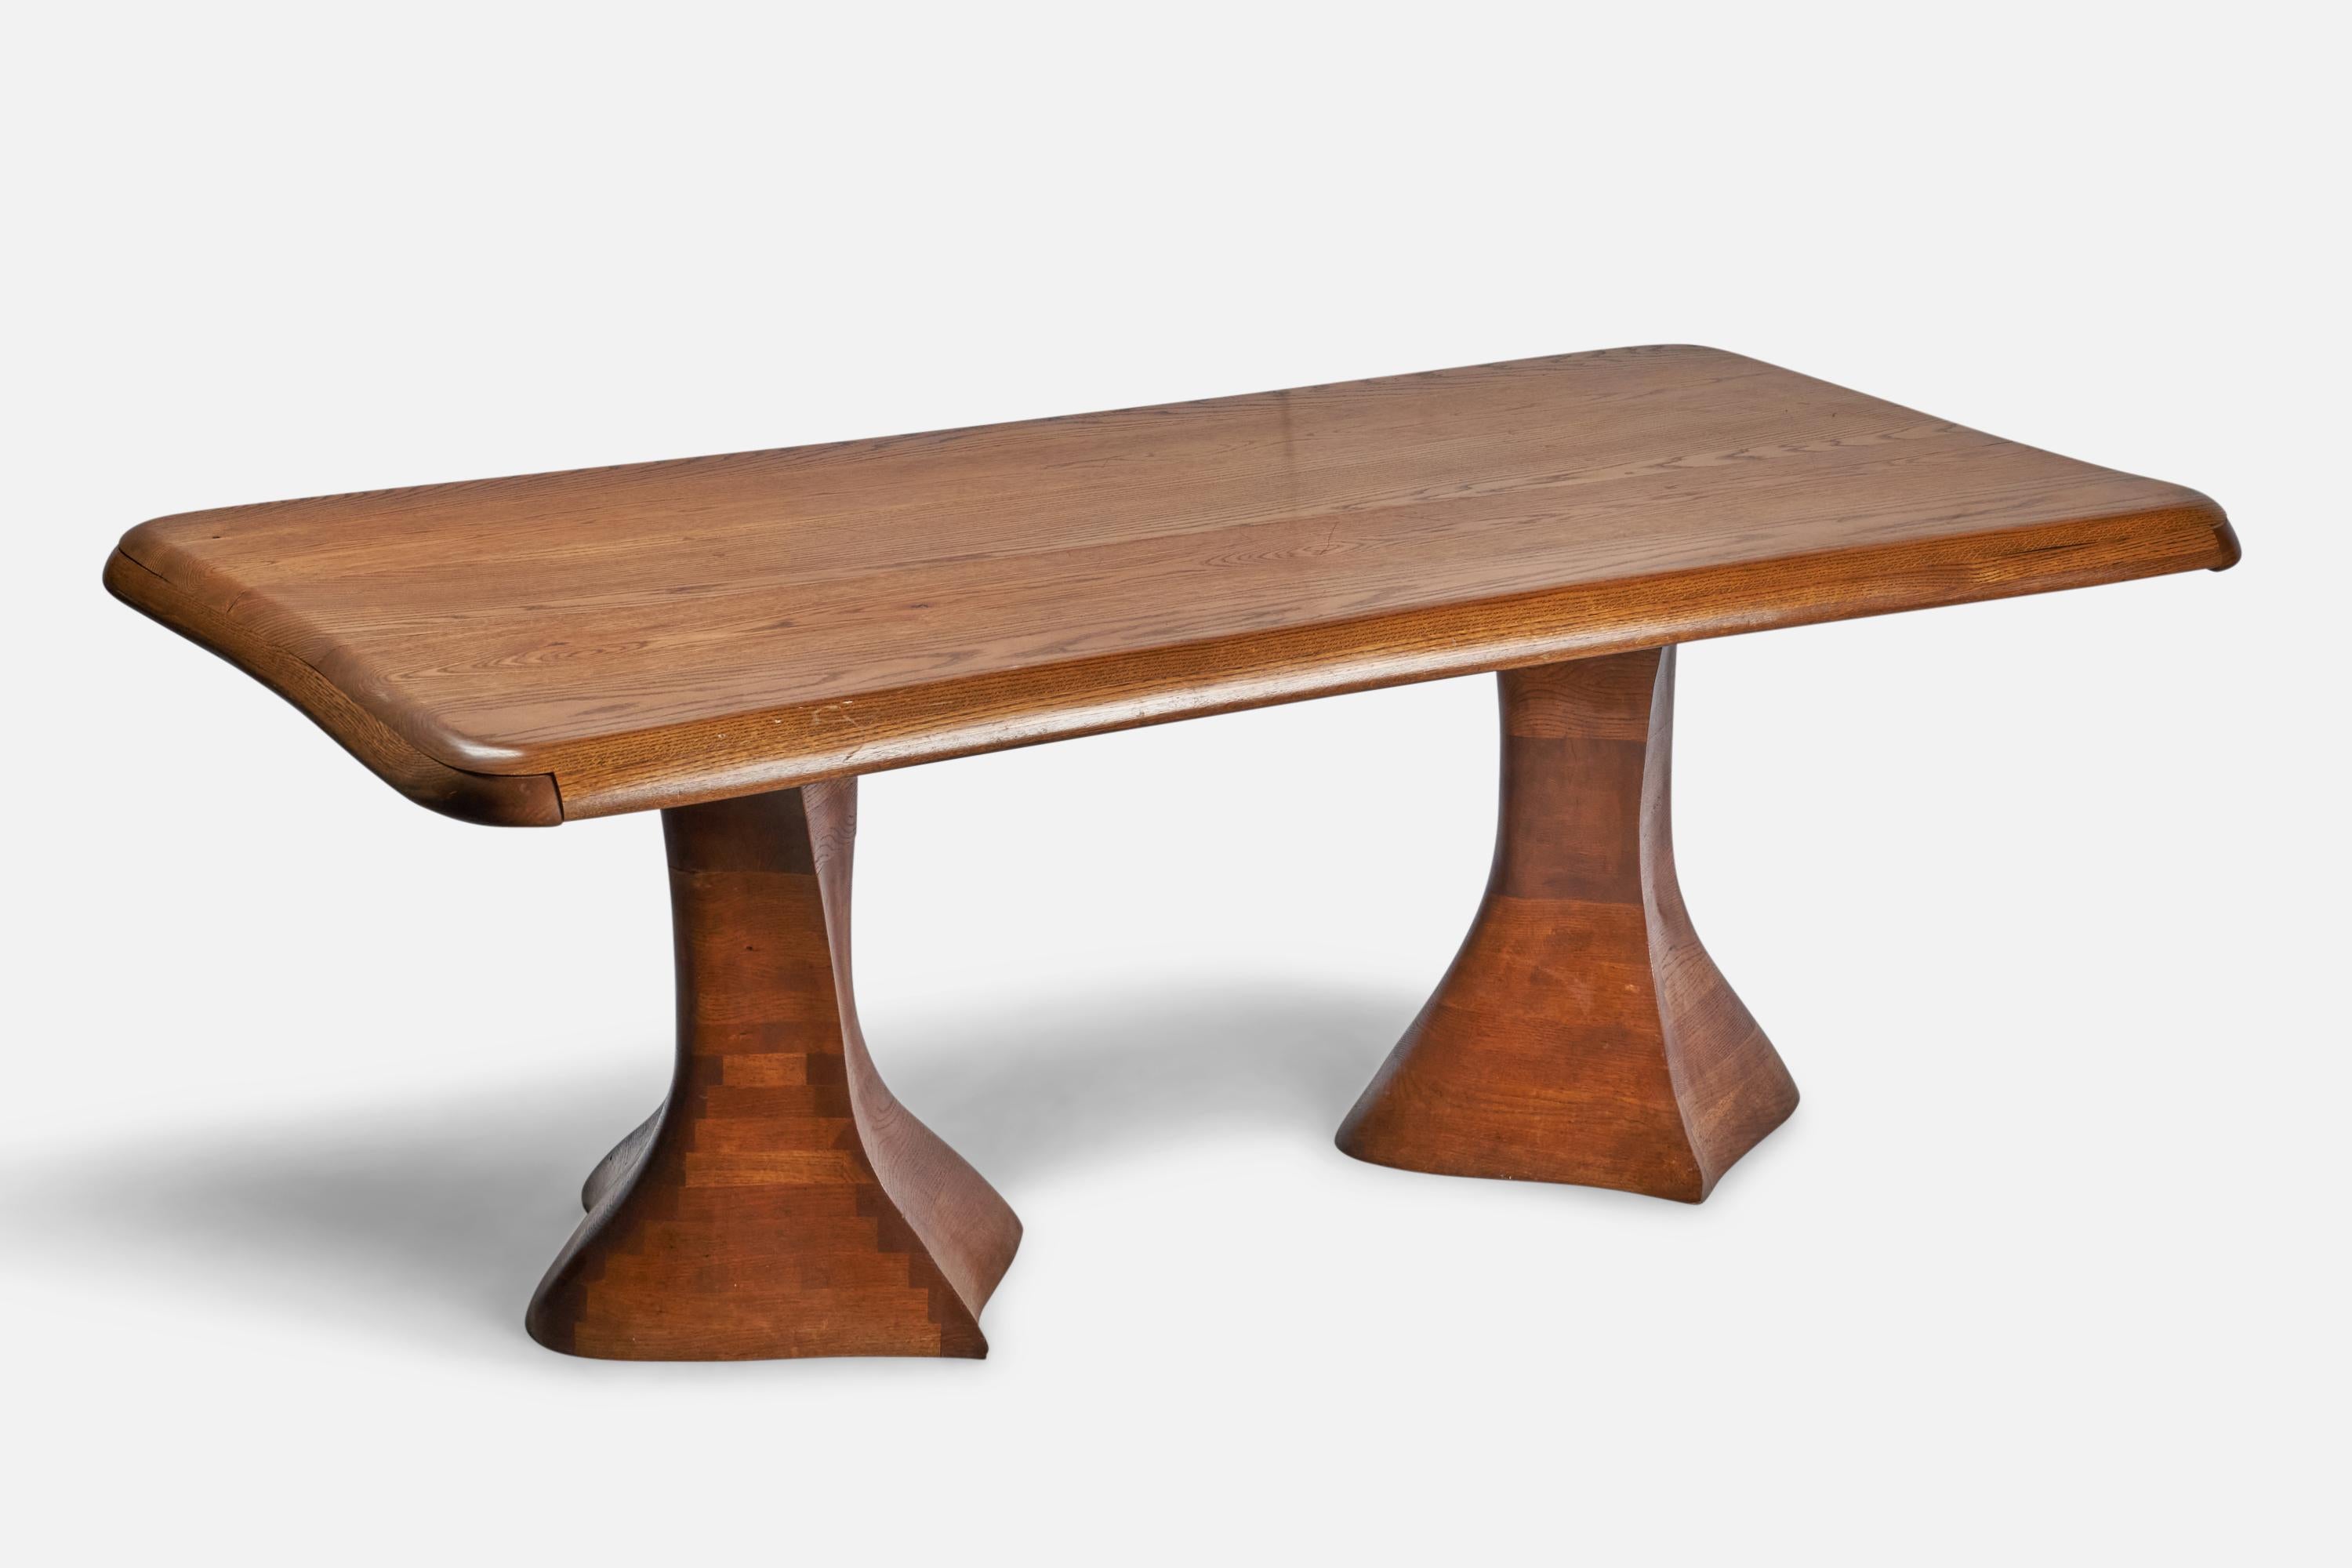 A laminated and carved oak dining table designed and produced in the US, c. 1980s.